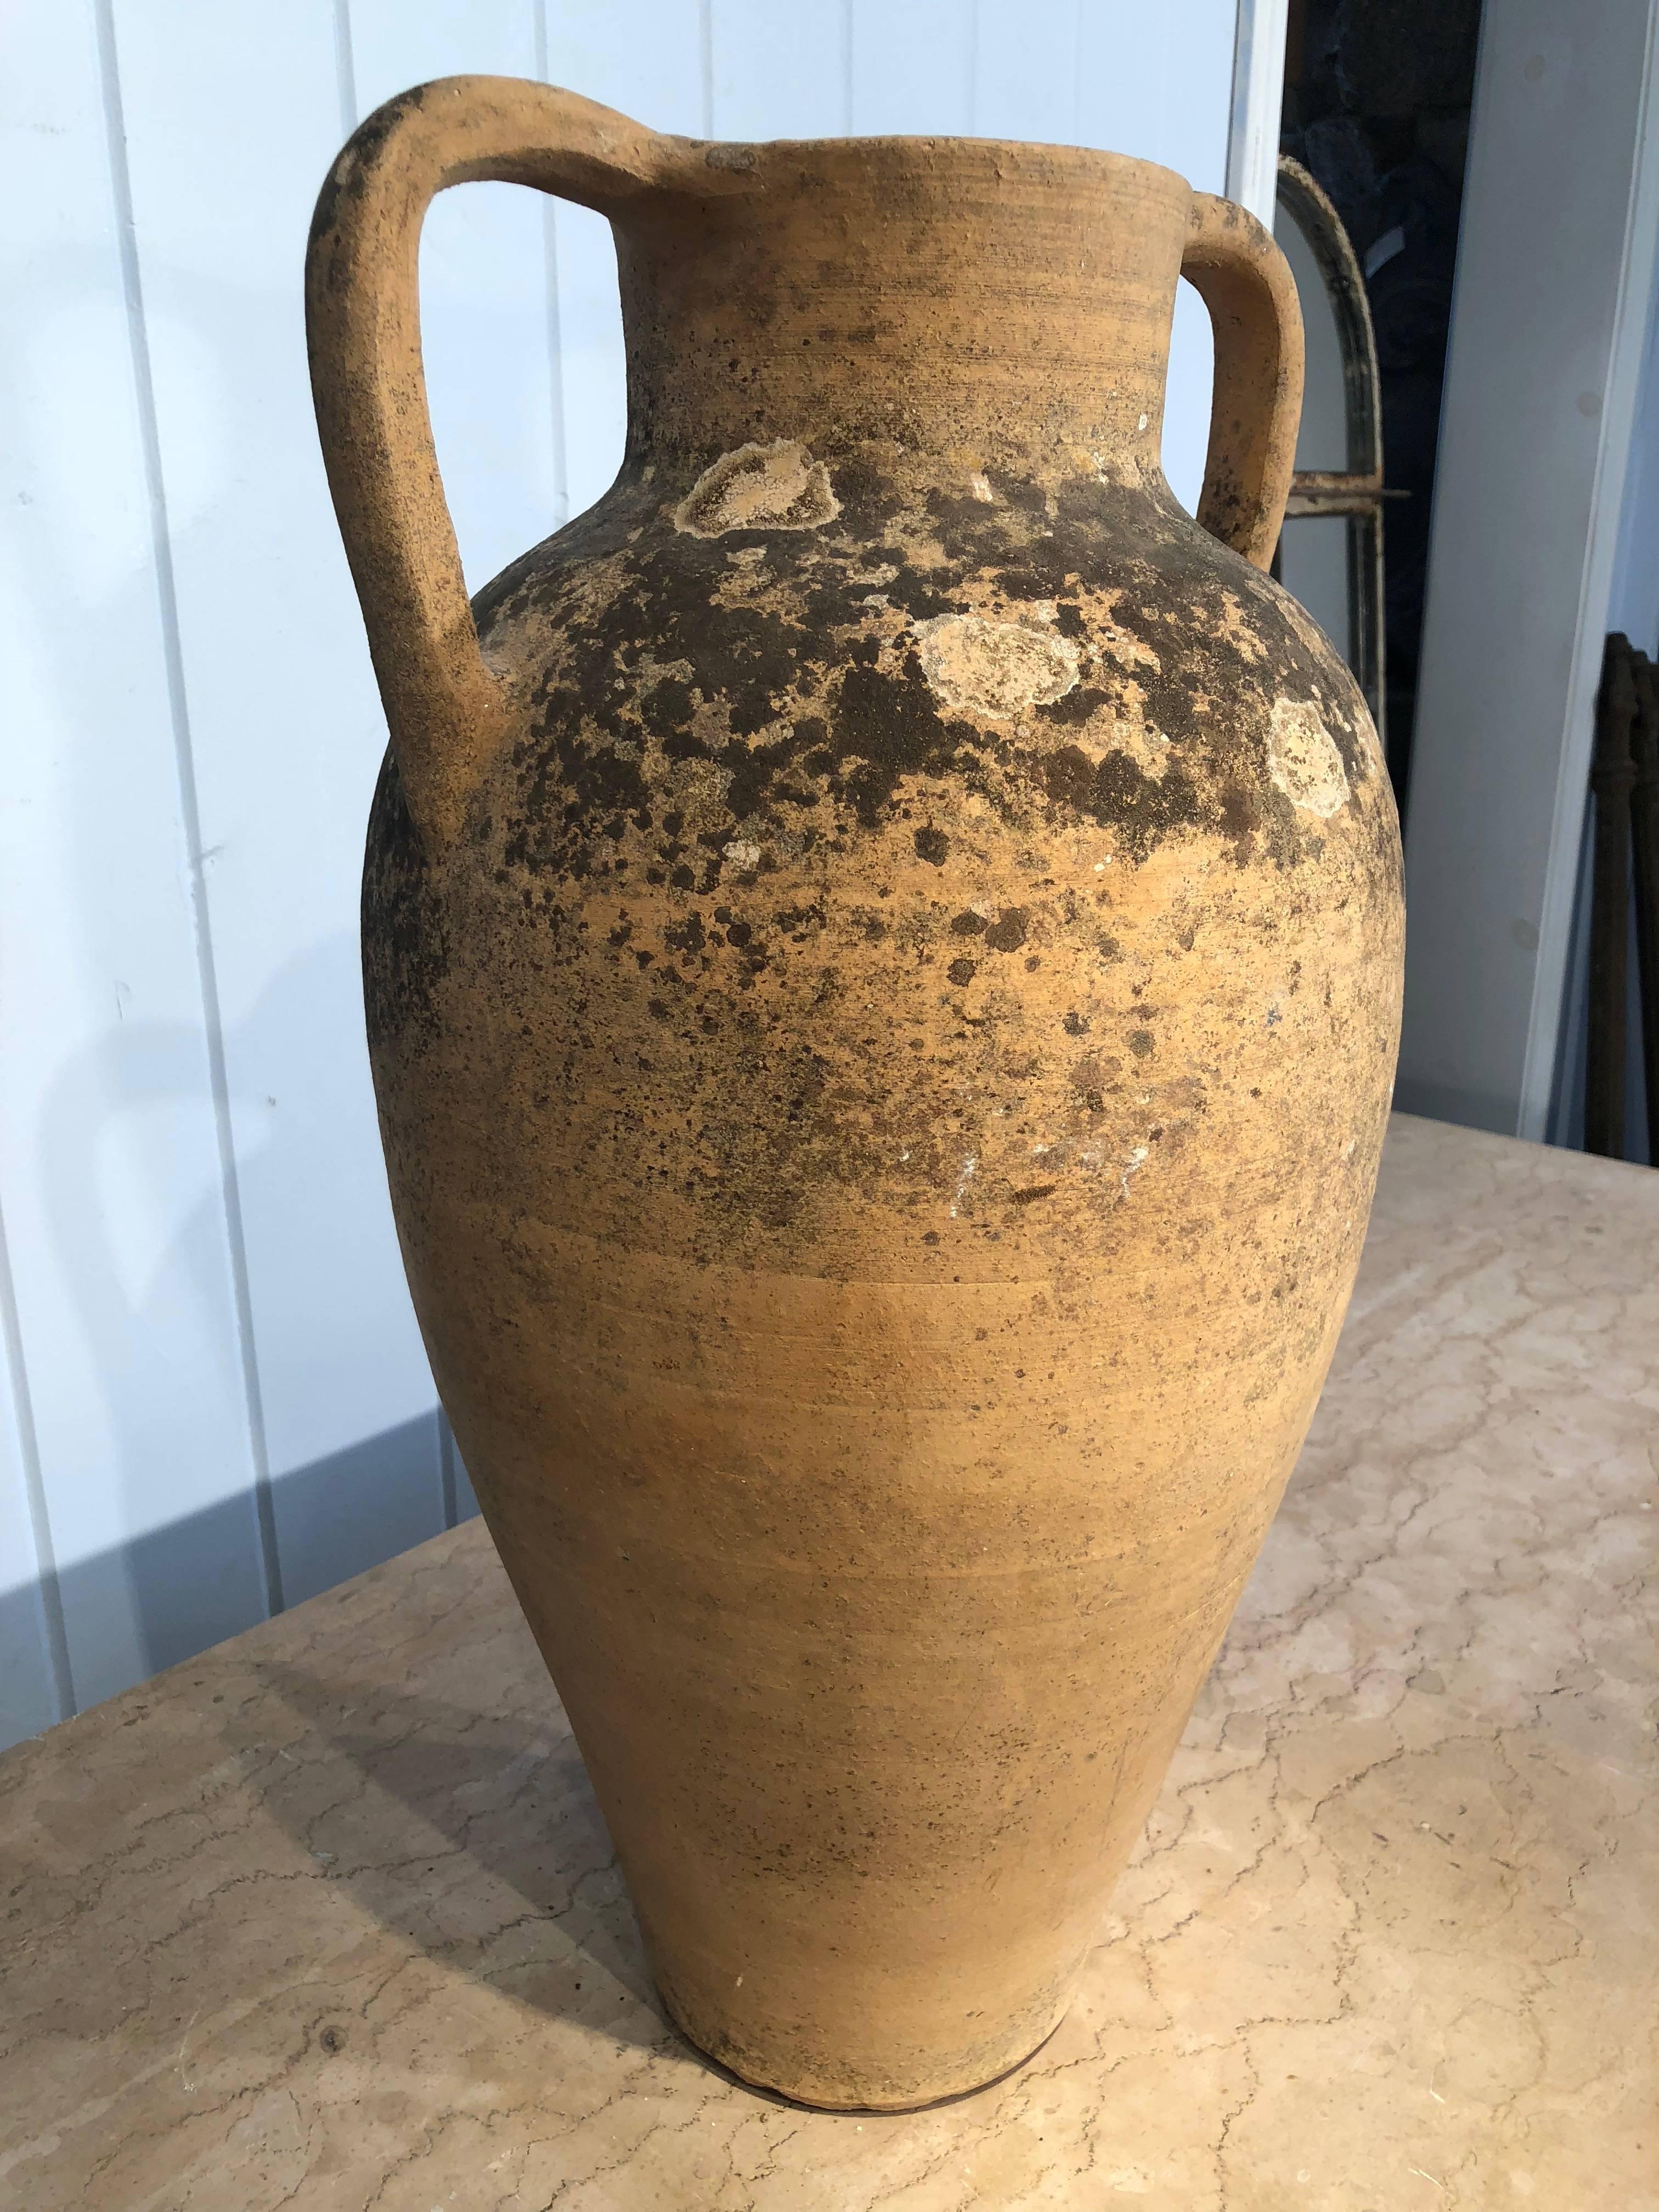 This stunning double-handled Amphora was originally used for water and is in perfect condition. With its beautiful patina, it would make a lovely planter inside or out, or use it simply as an objet d'art. It already has a drain hole drilled, but